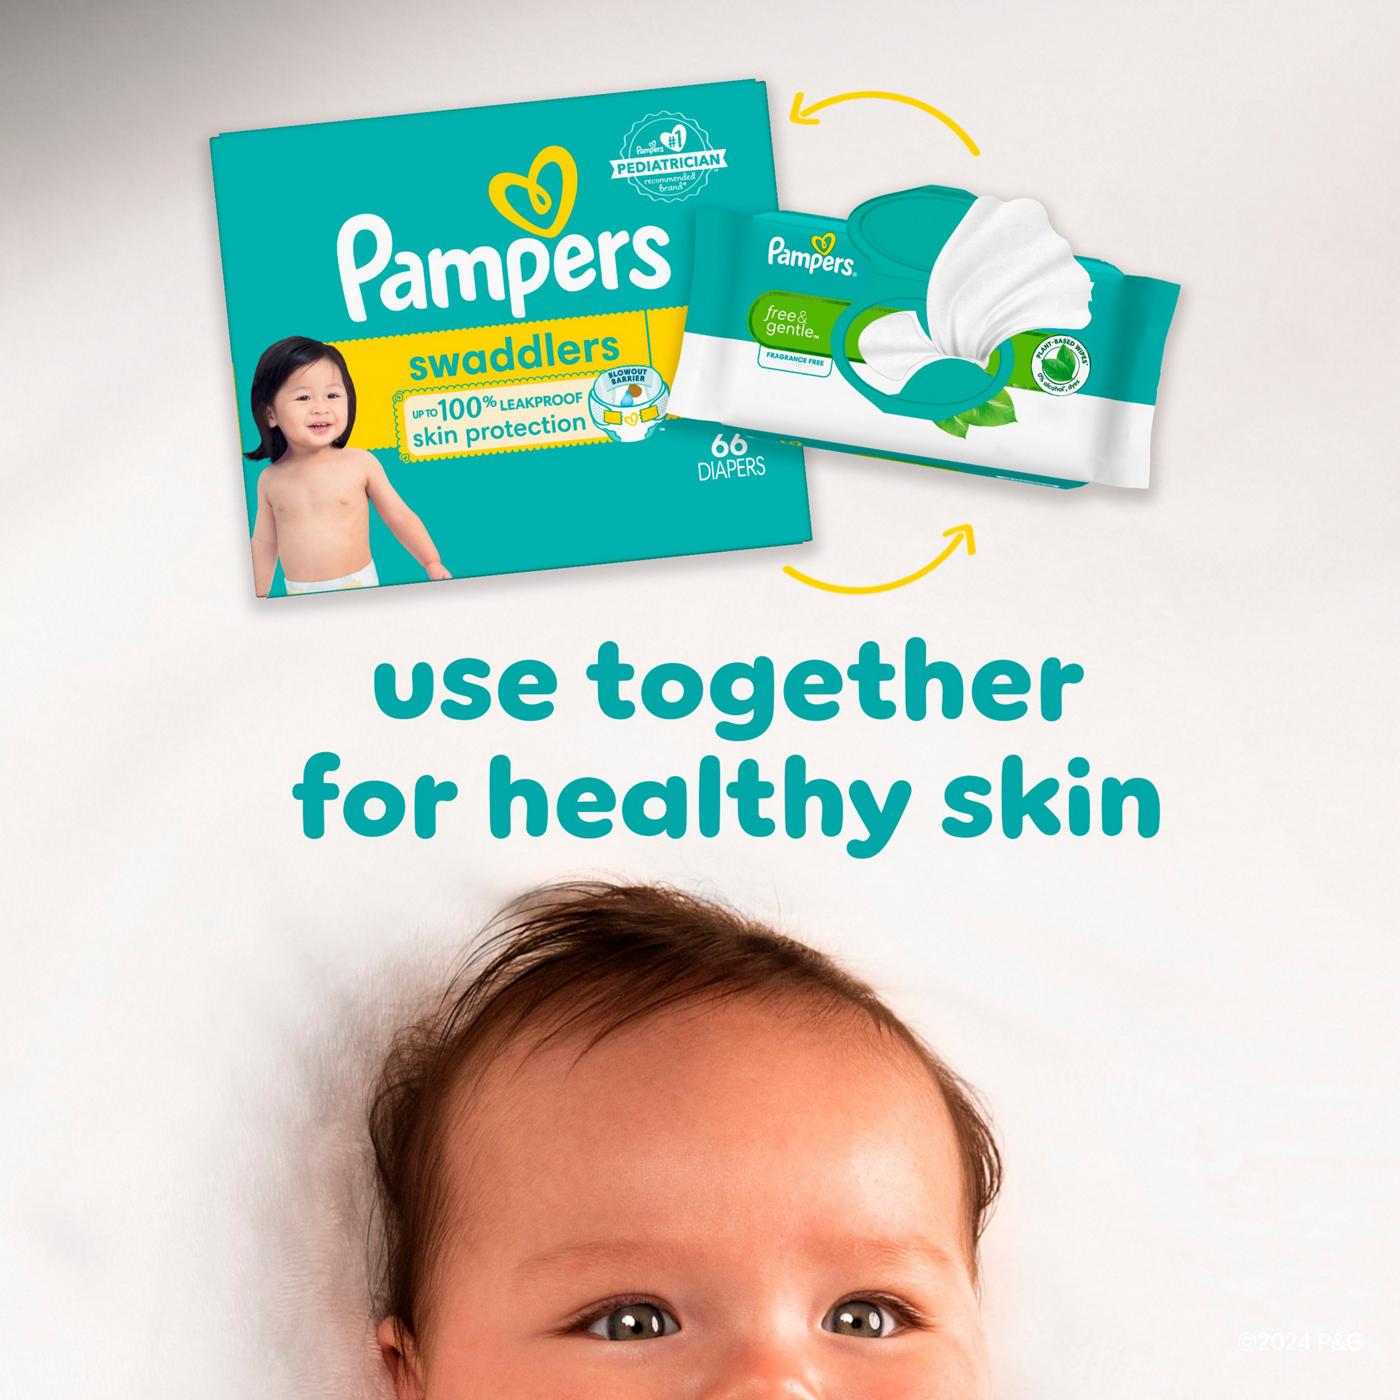 Pampers Free & Gentle Baby Wipes 8 pk; image 7 of 10